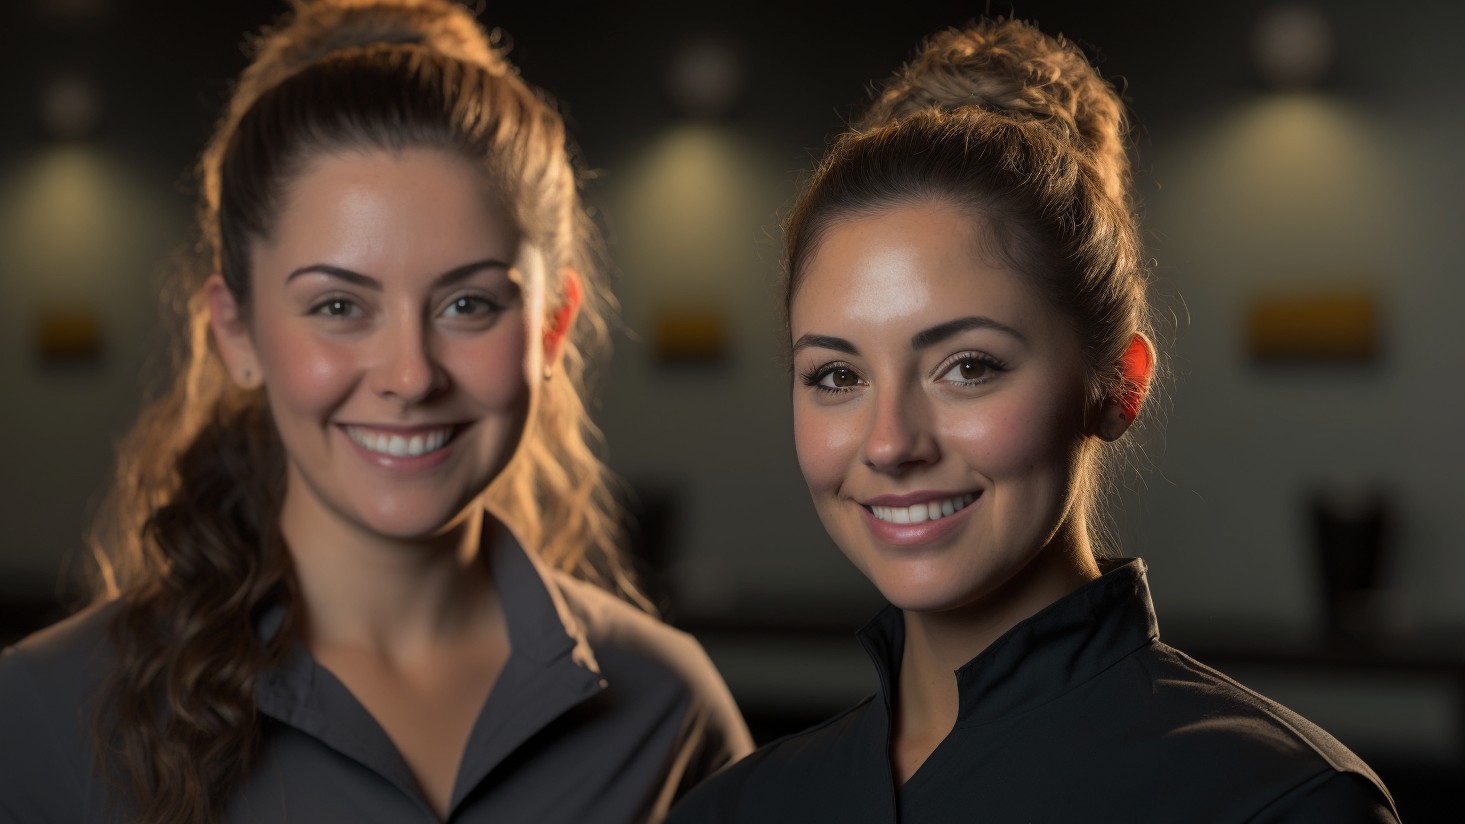 Registered and non-registered massage therapists side by side